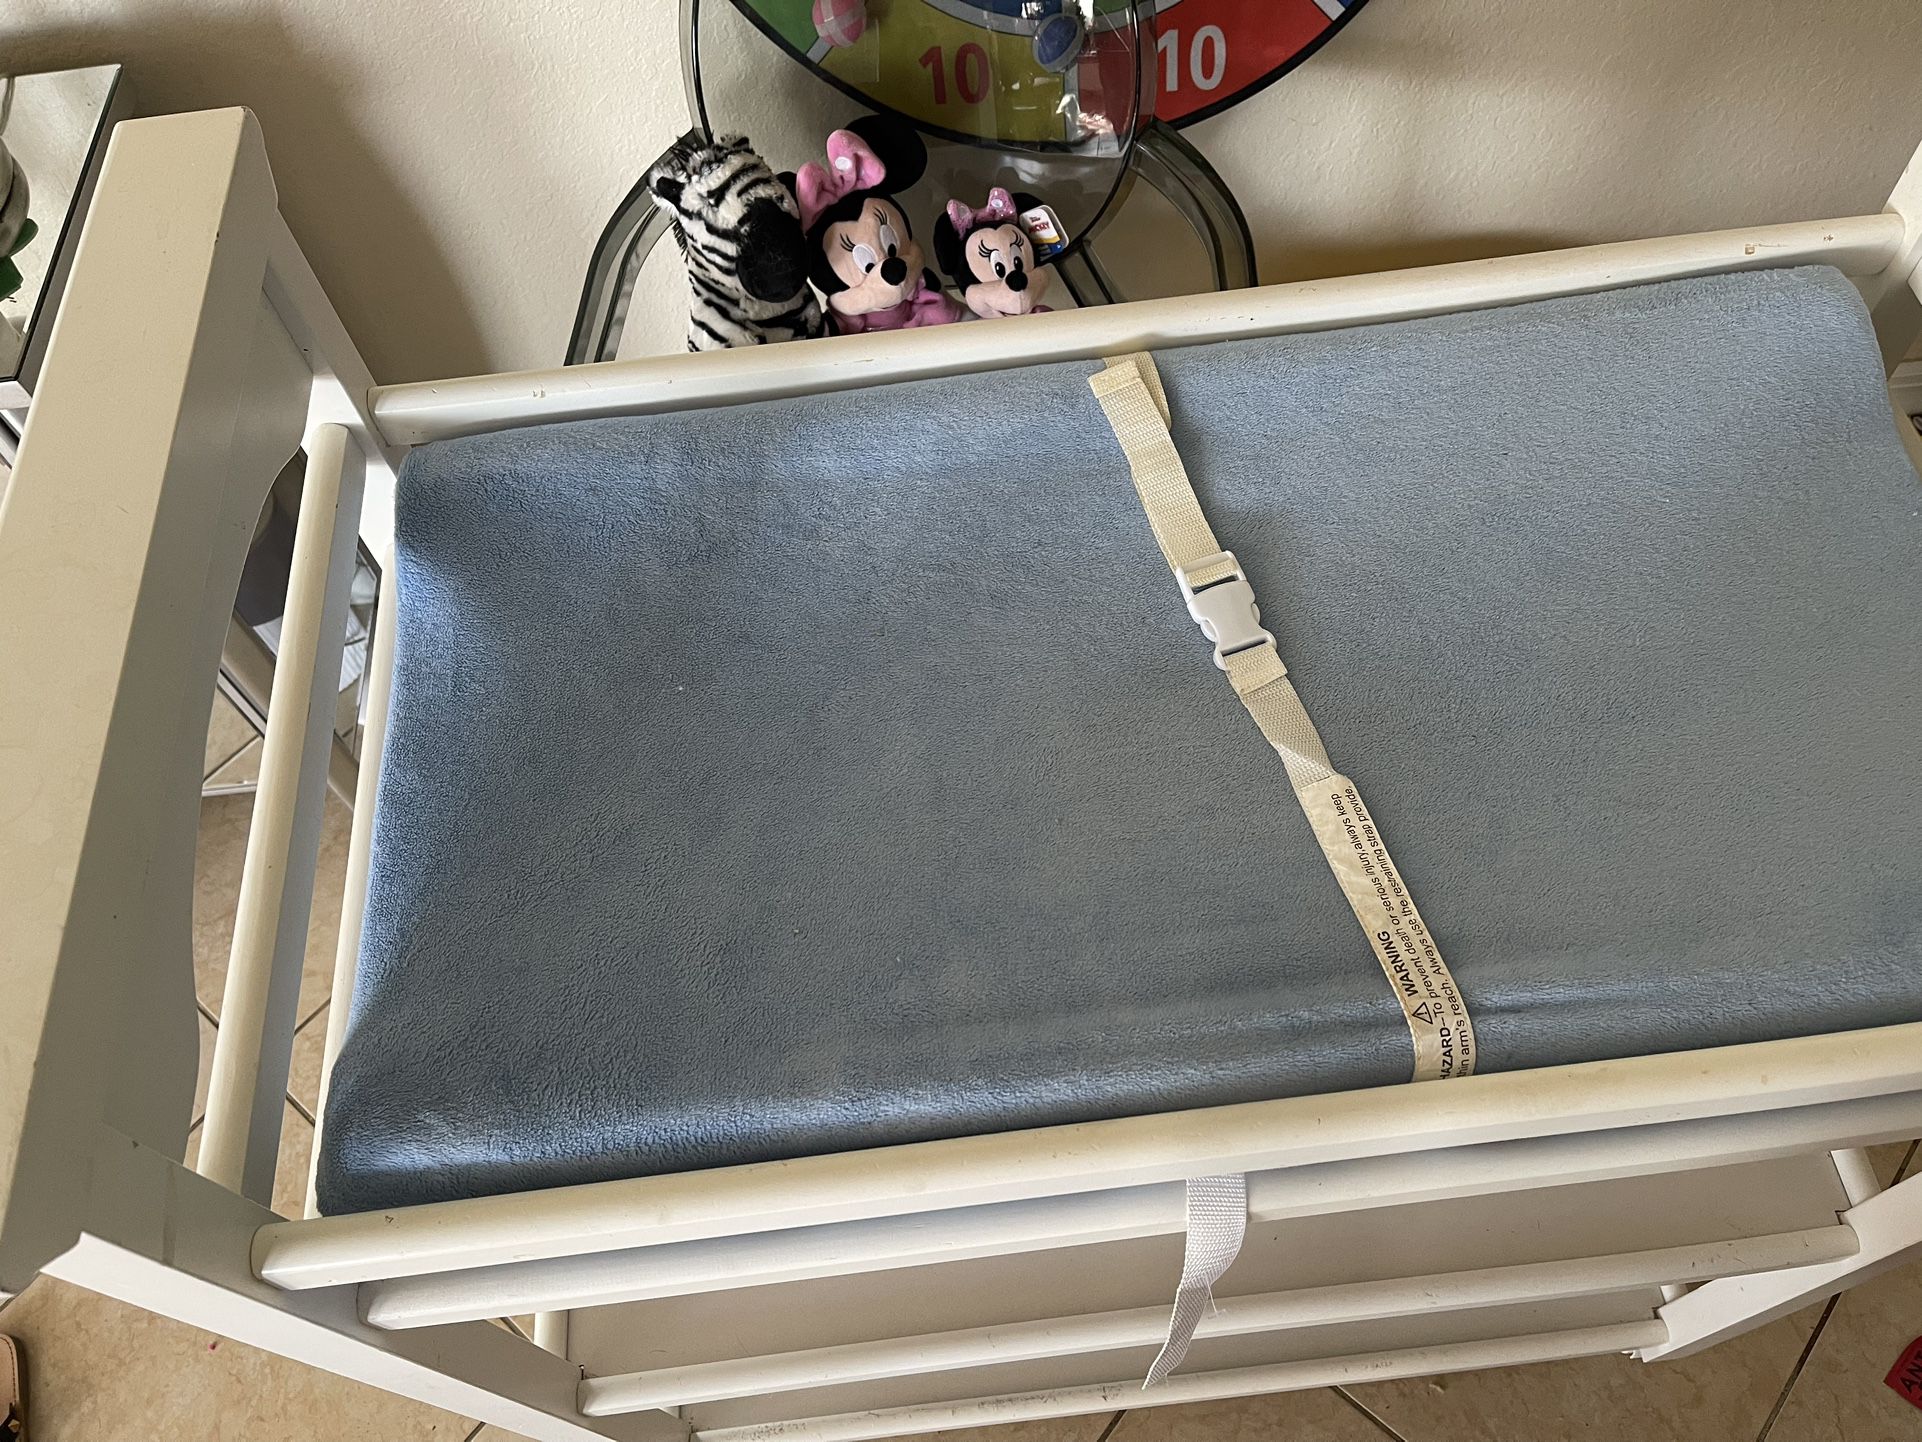 Graco Changing Table Used 